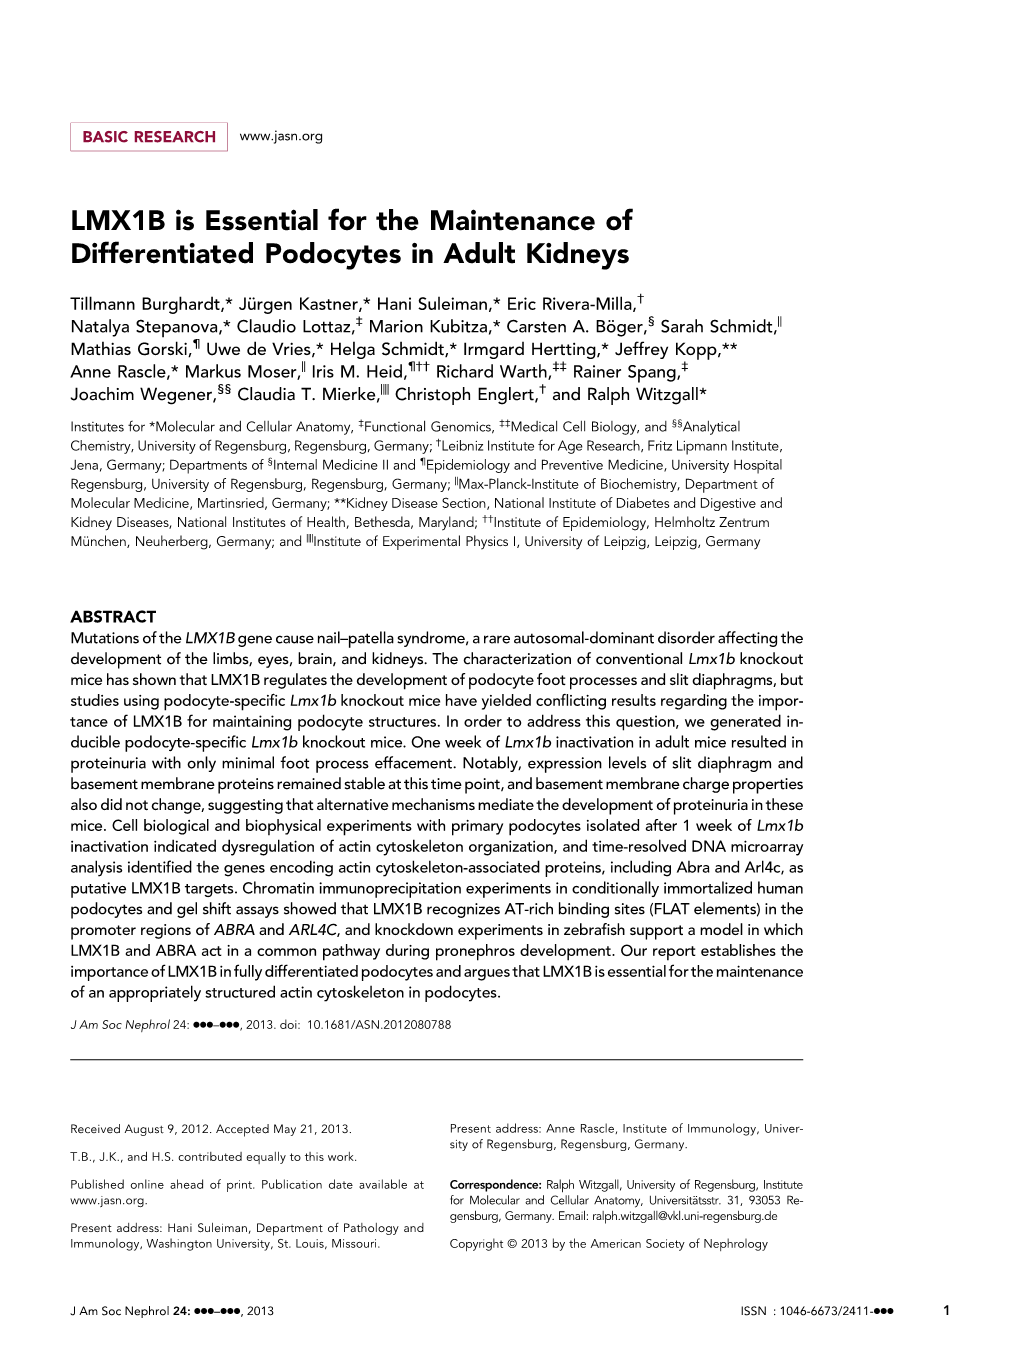 LMX1B Is Essential for the Maintenance of Differentiated Podocytes in Adult Kidneys